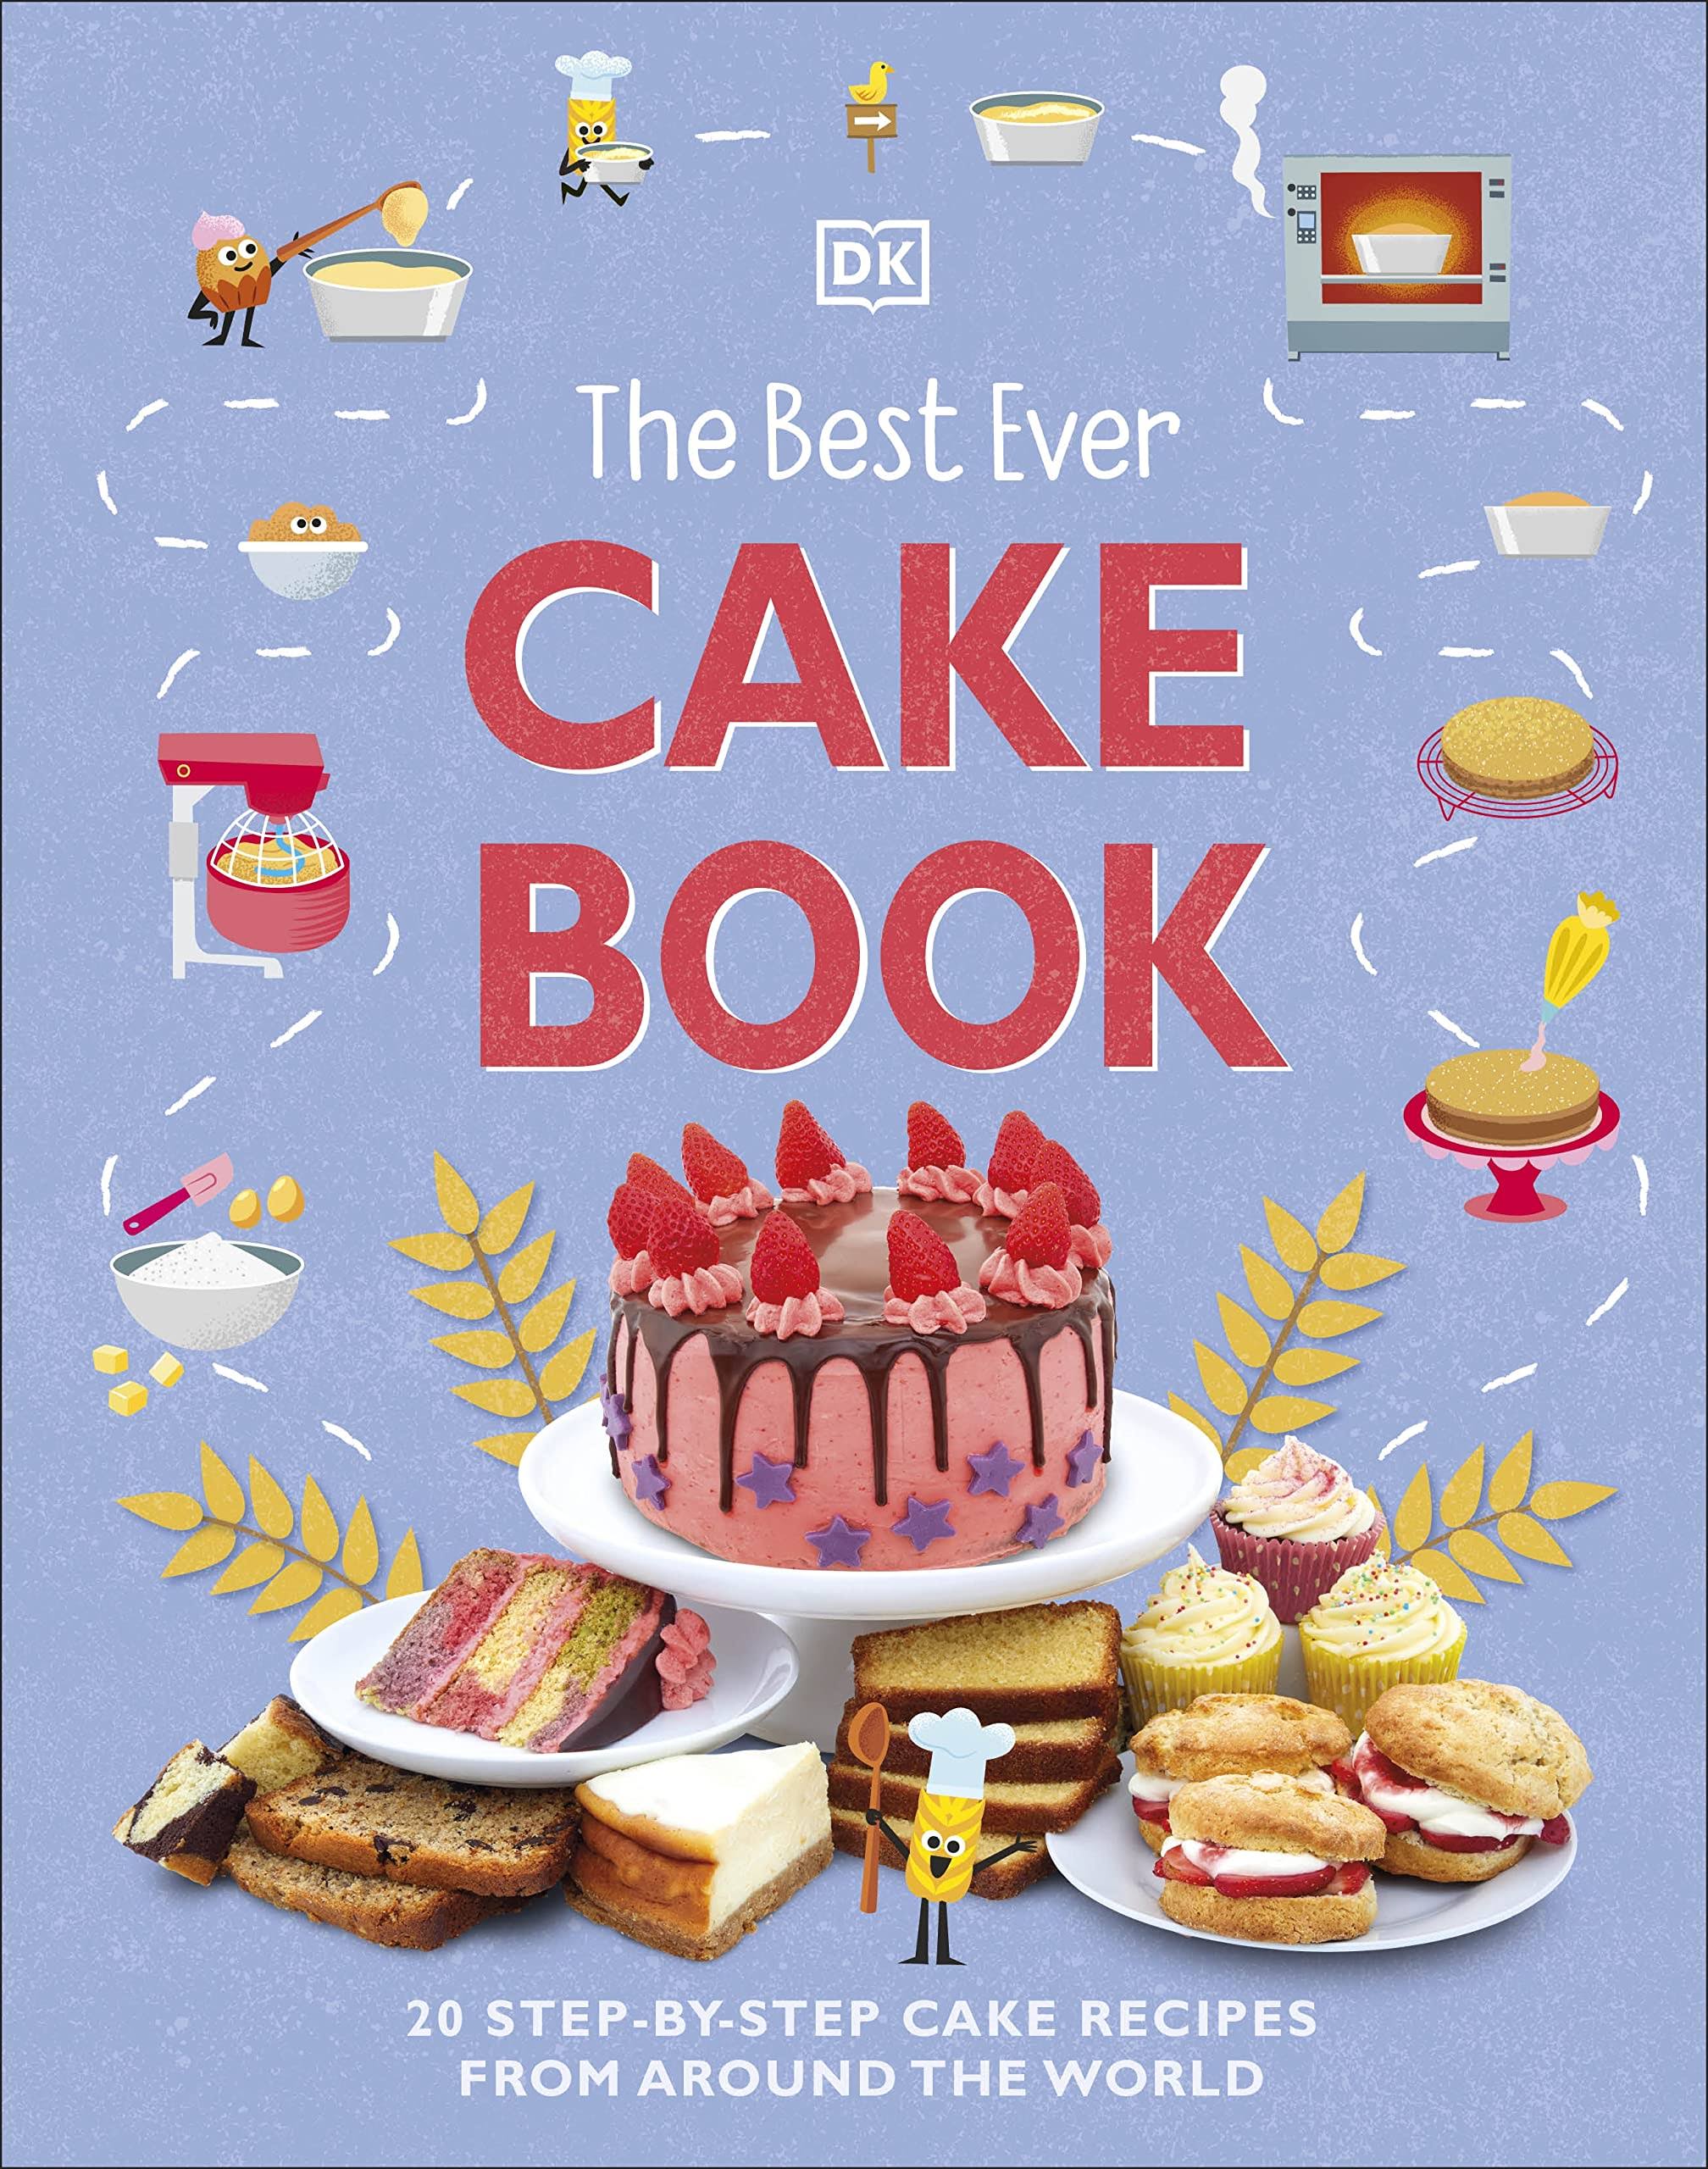 The Best Ever Cake Book by Dk